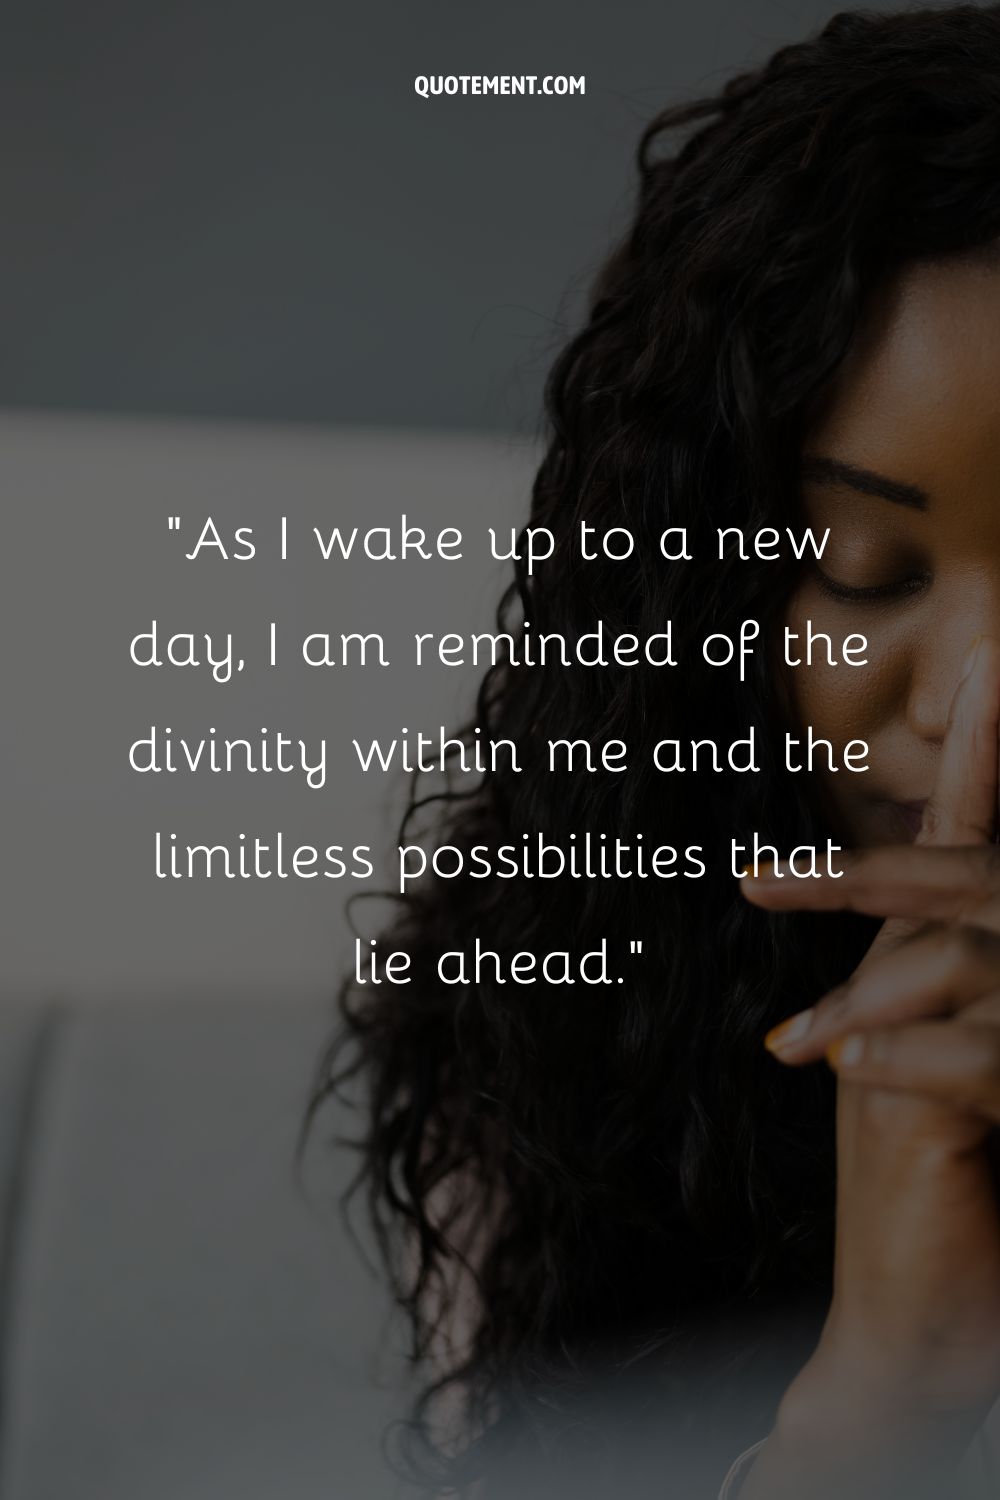 As I wake up to a new day, I am reminded of the divinity within me and the limitless possibilities that lie ahead